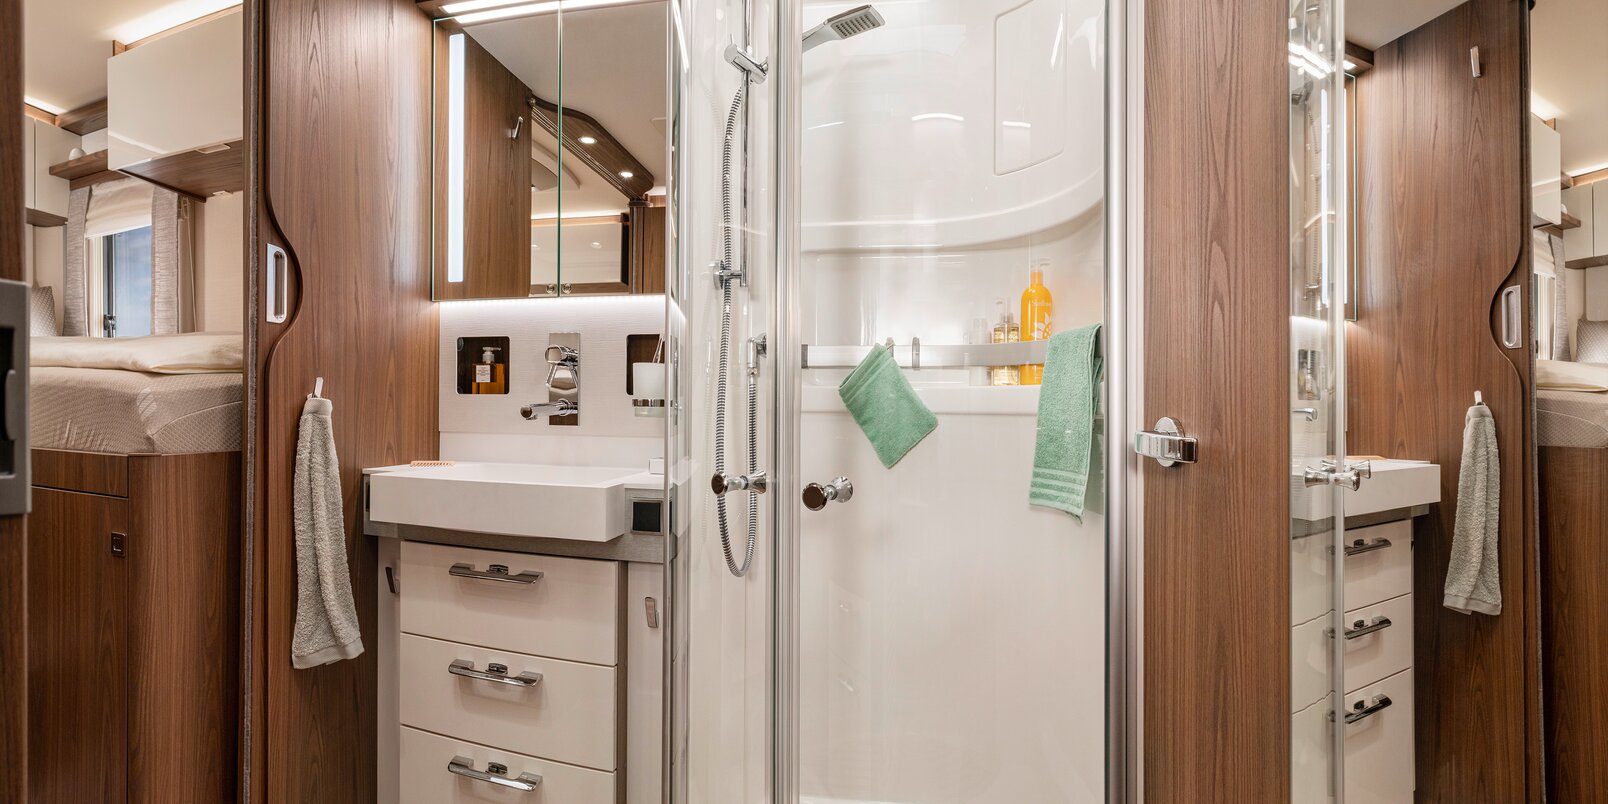 Bathroom in the HYMER B-ML I 880: mirror cabinet, drawers under the washbasin, separate shower with real glass doors, bathroom accessories